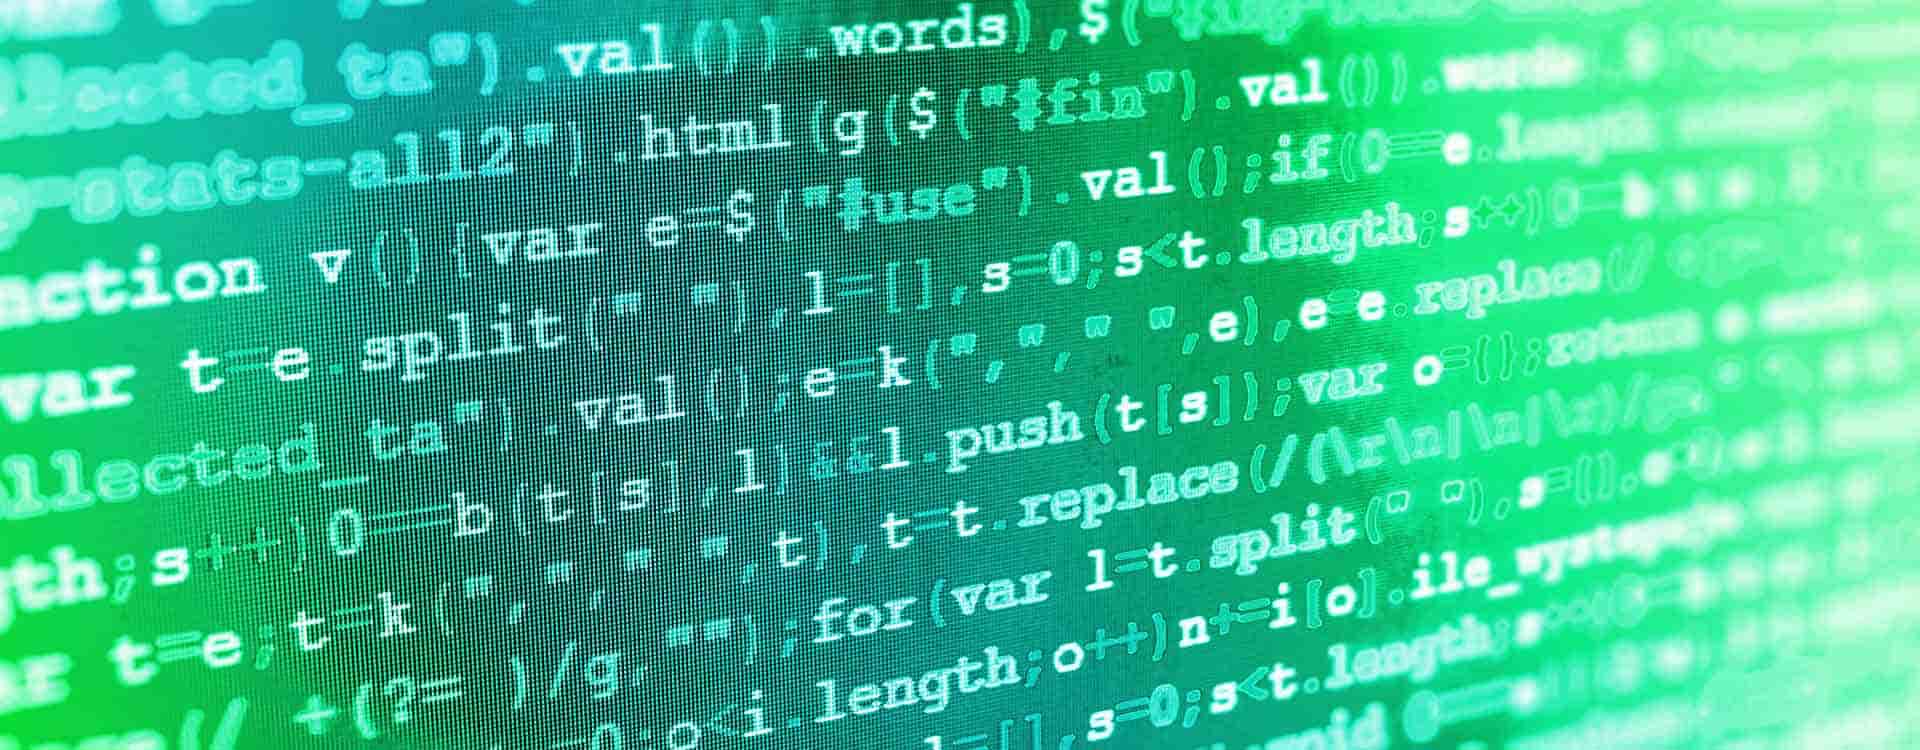 A close-up image of a computer screen displaying programming code in green text on a dark background, emphasizing software development and coding.